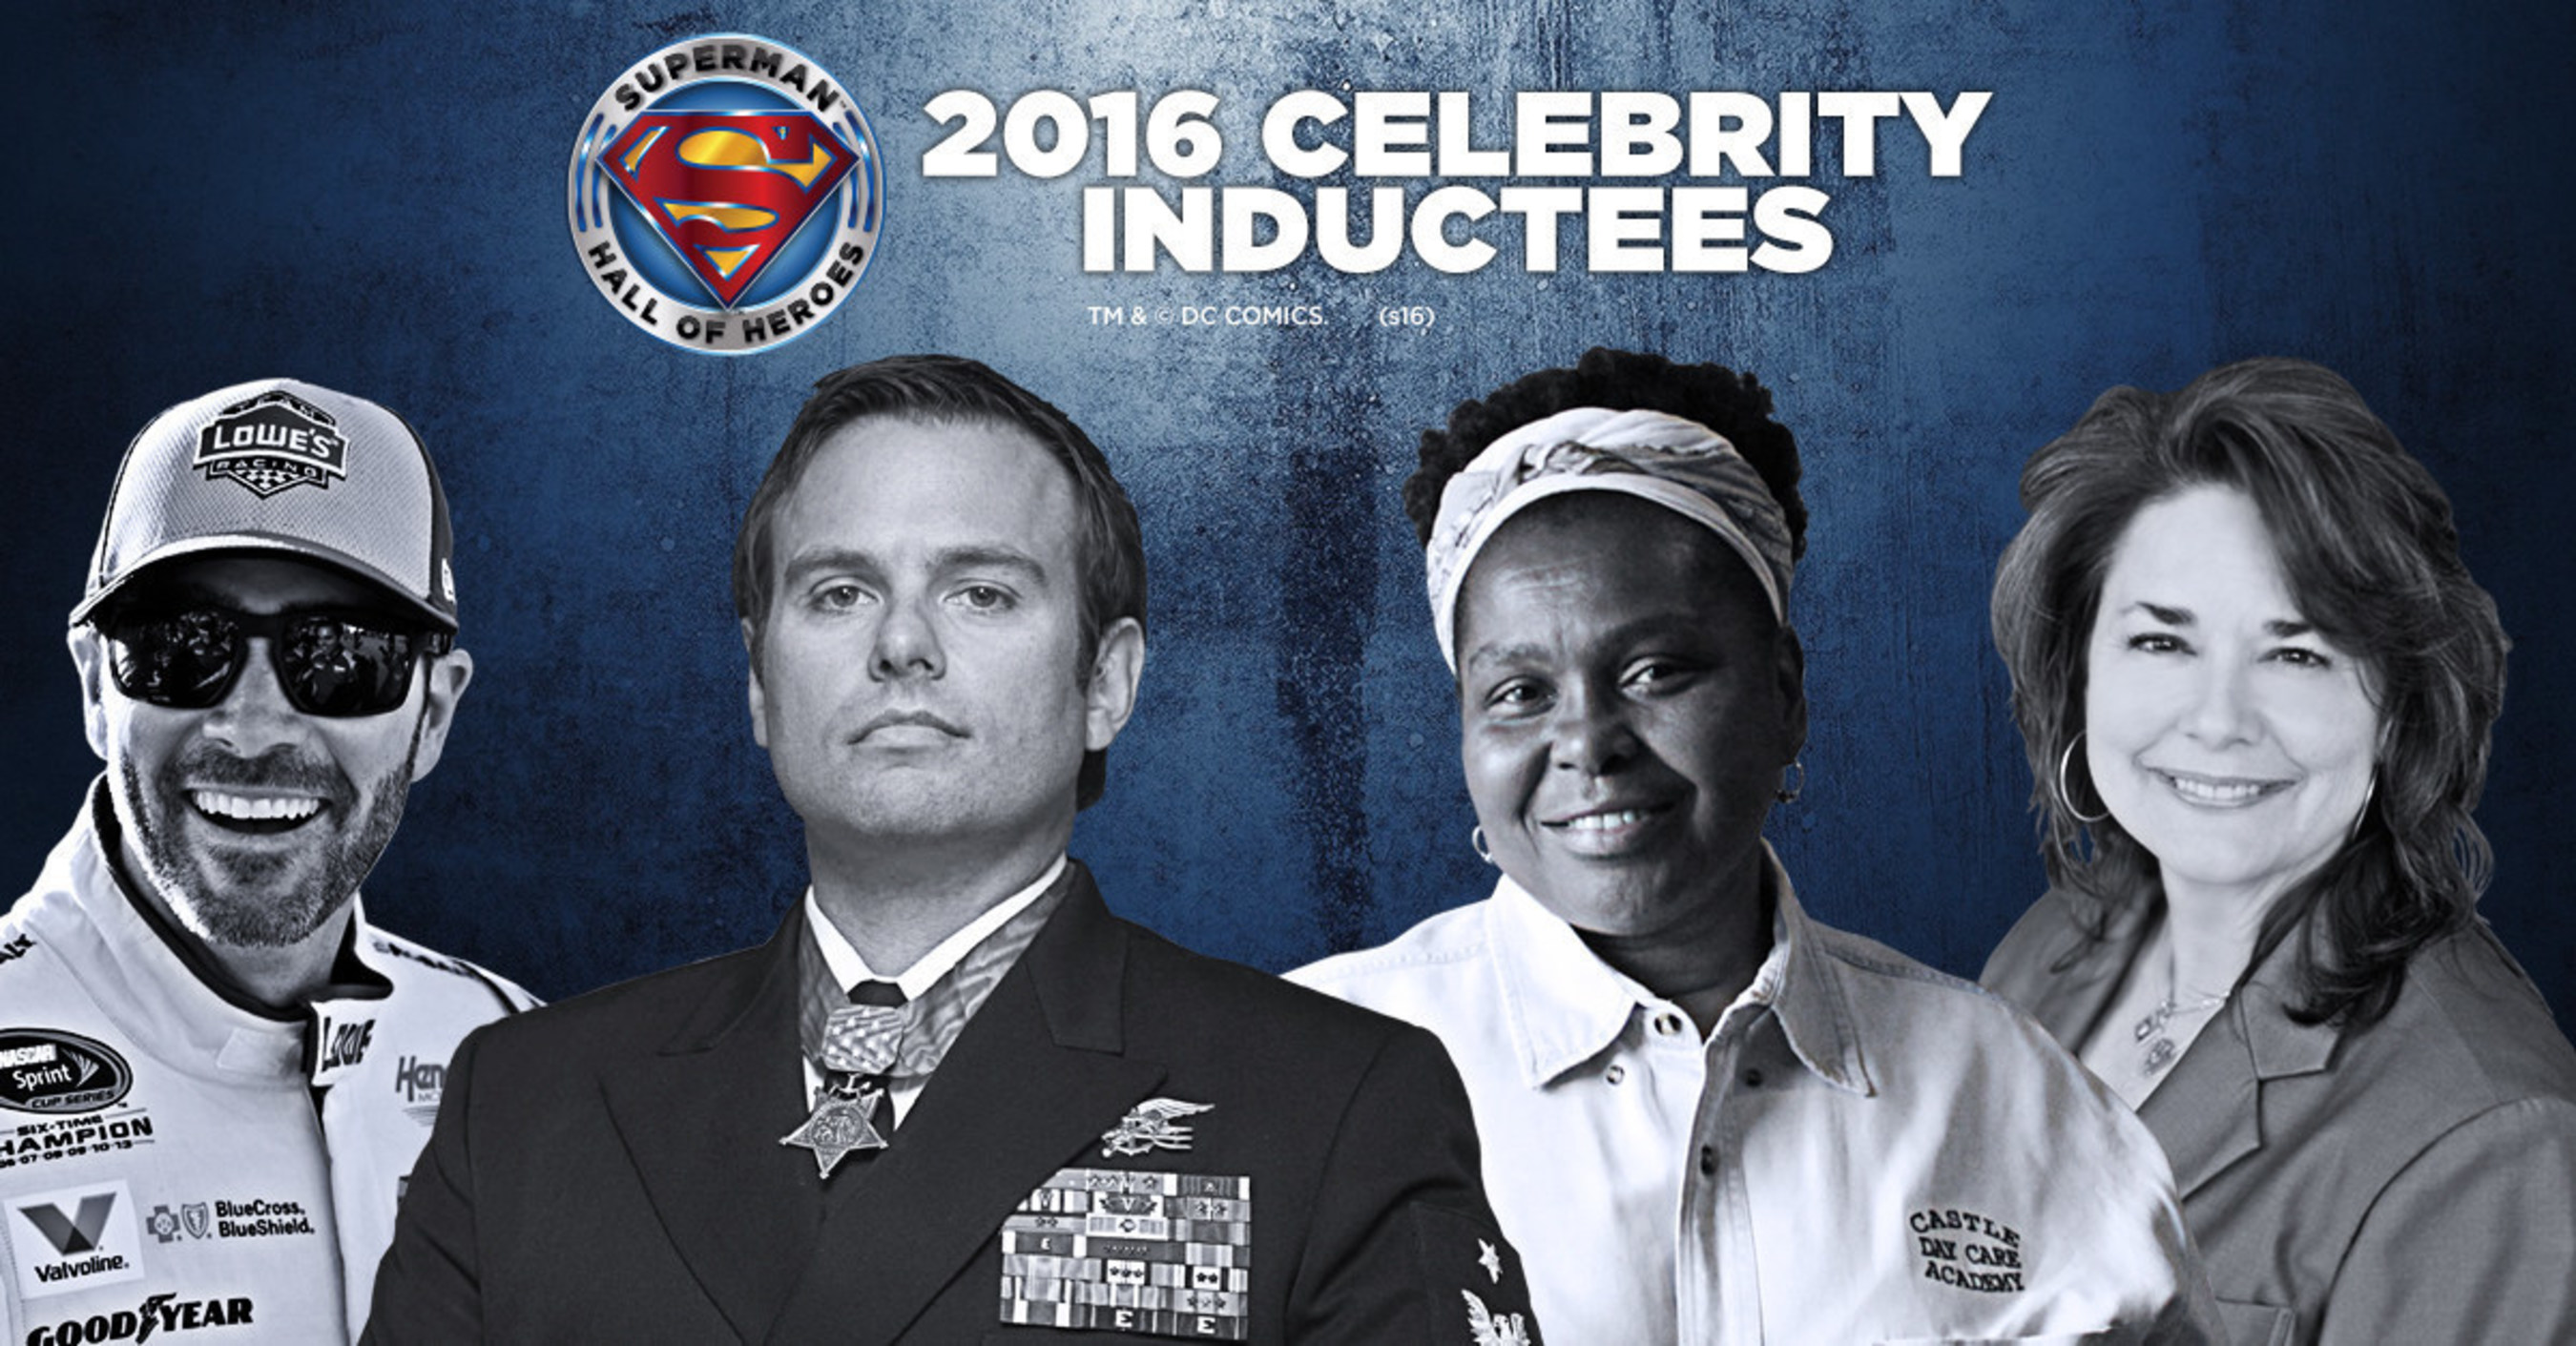 Warner Bros. Consumer Products and DC Entertainment Announce the 2016 Superman Hall of Heroes Inductees